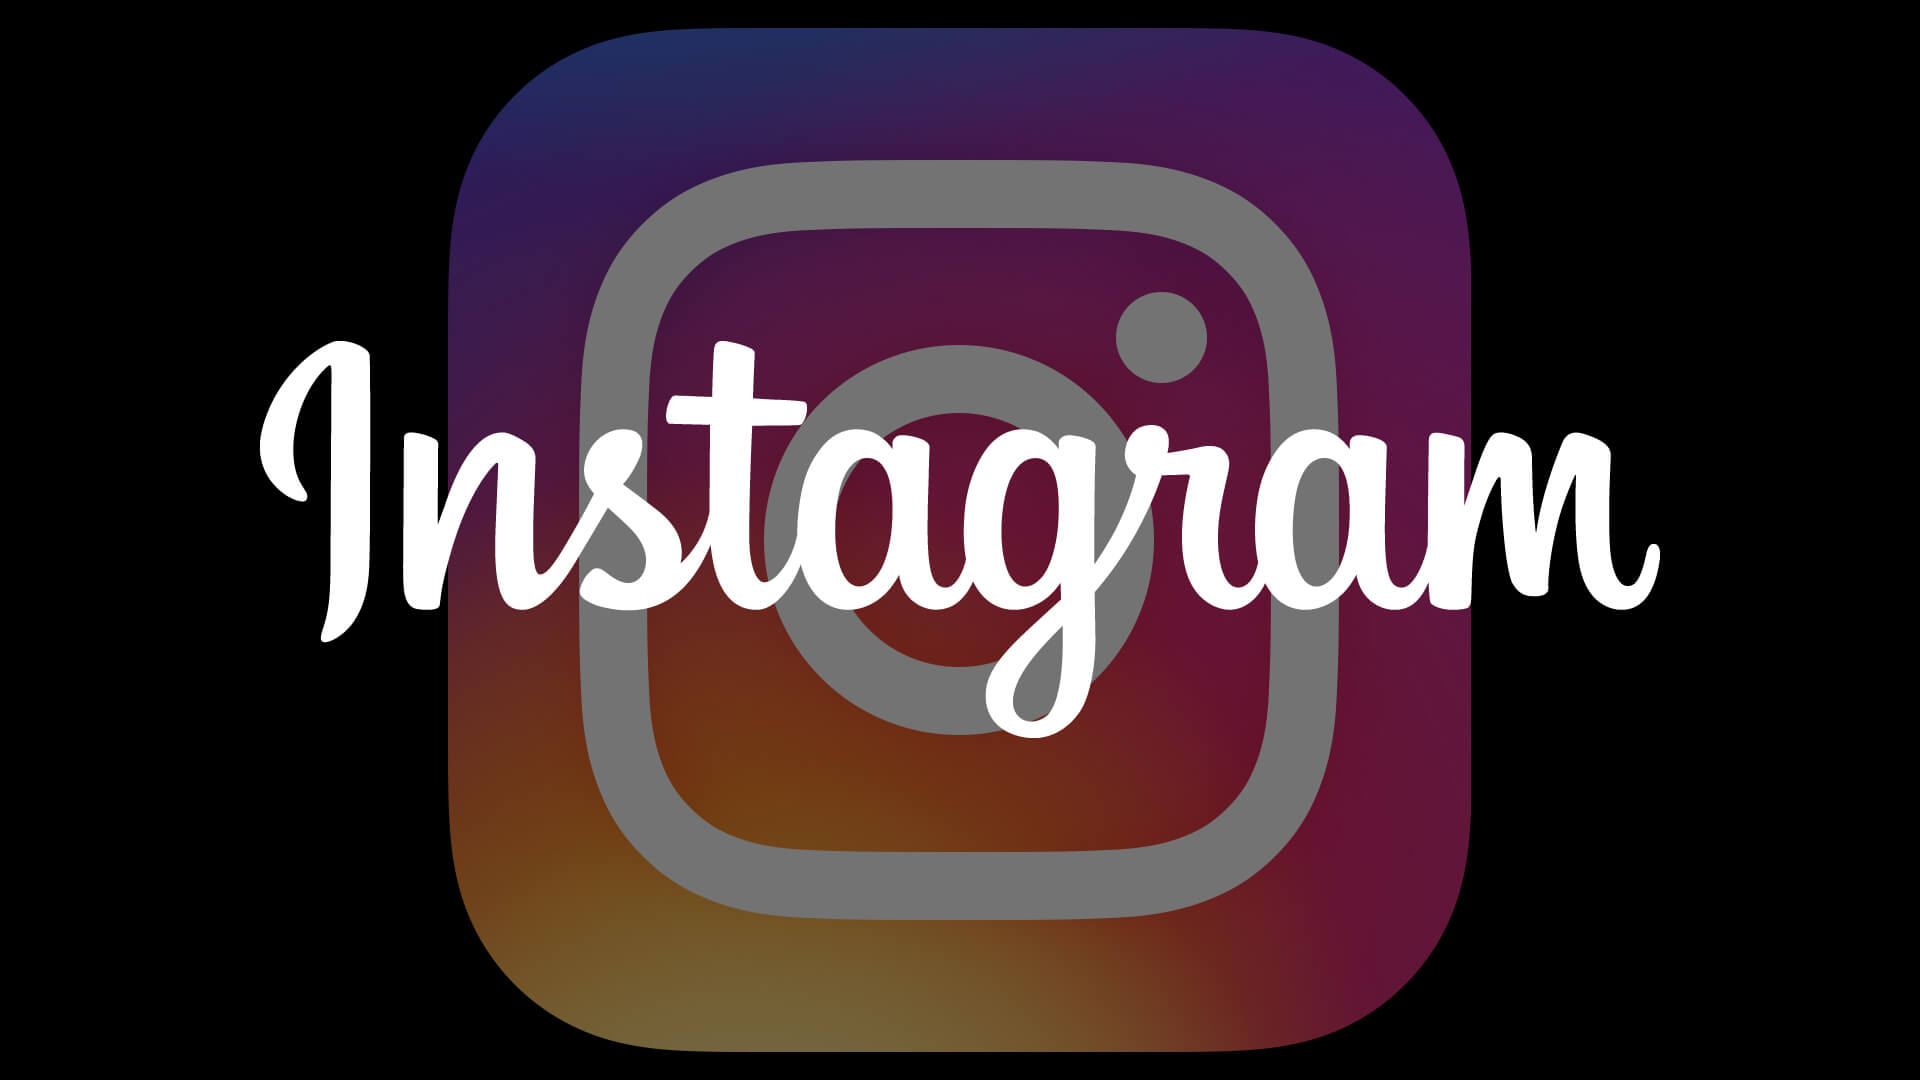 instagram hack - how to hack instagram account on android 2017 without root